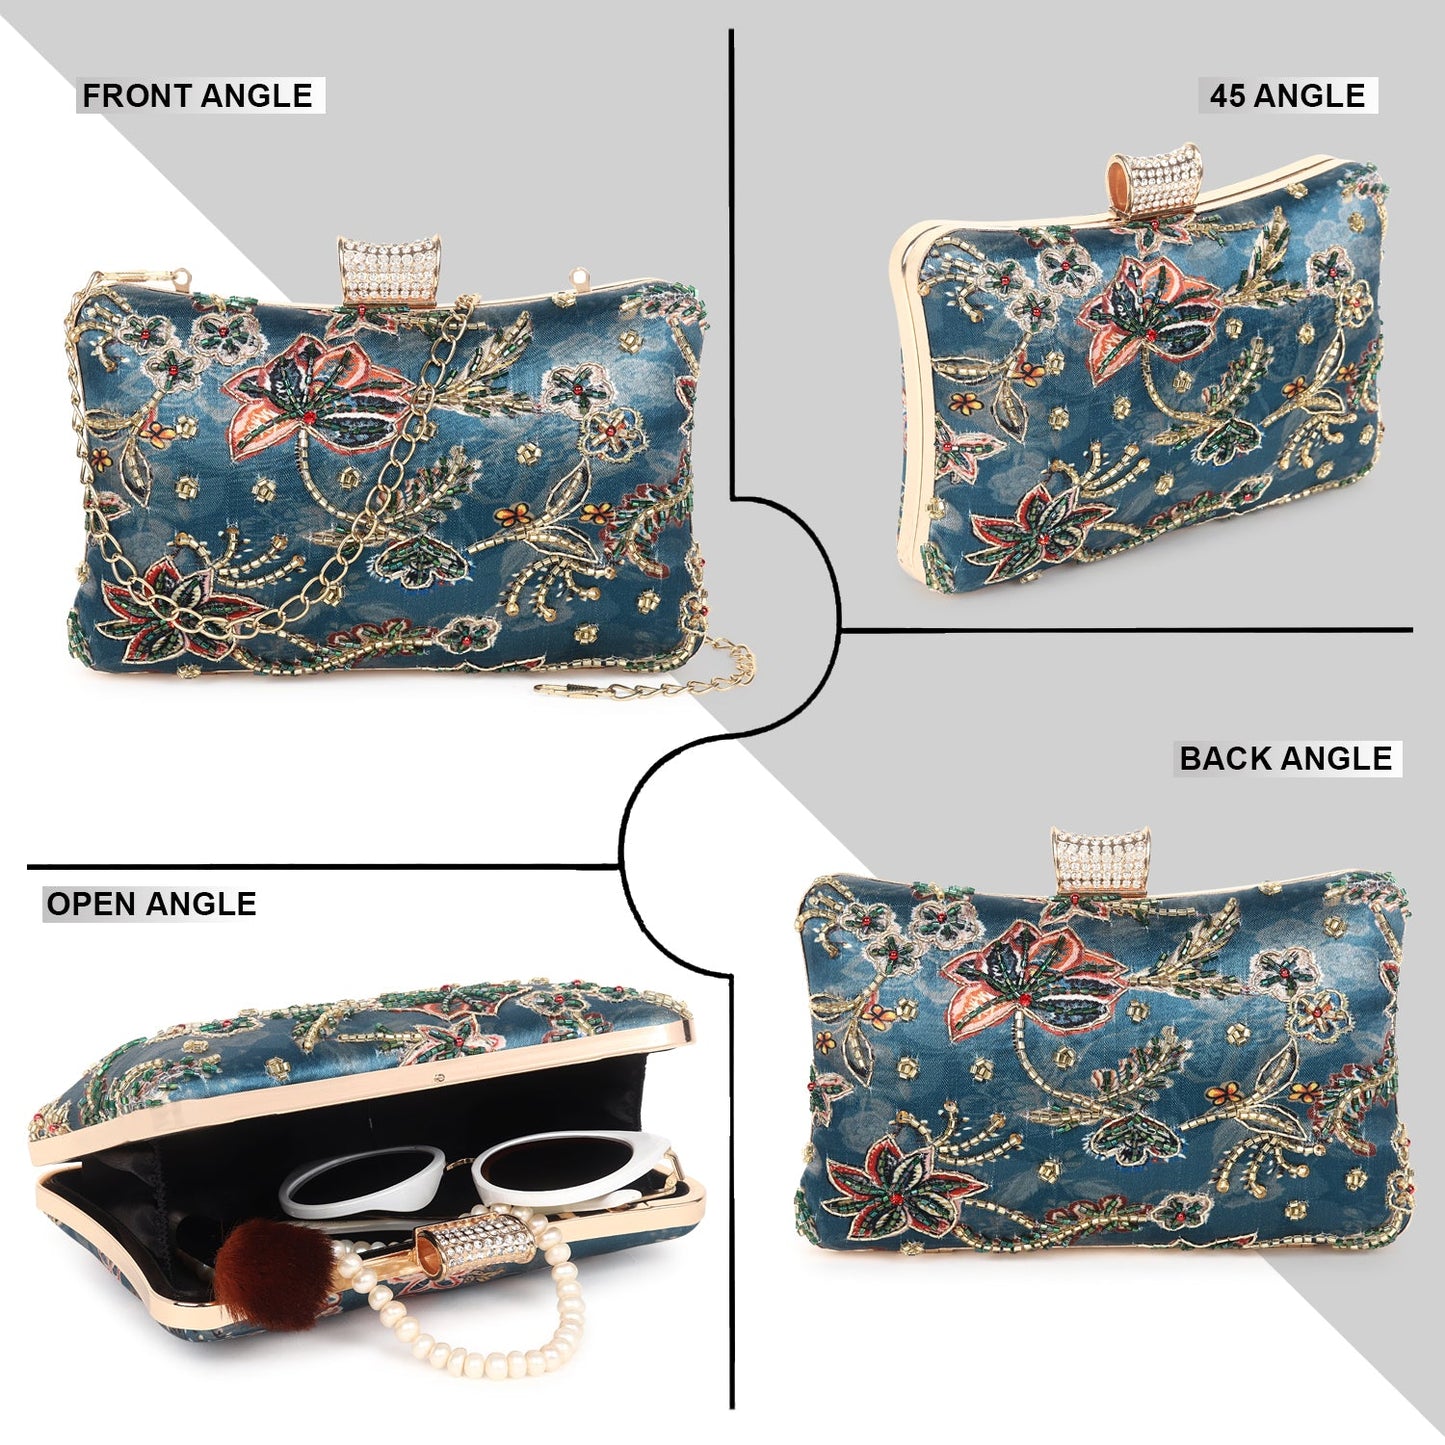 Printed embroidered clutch bag